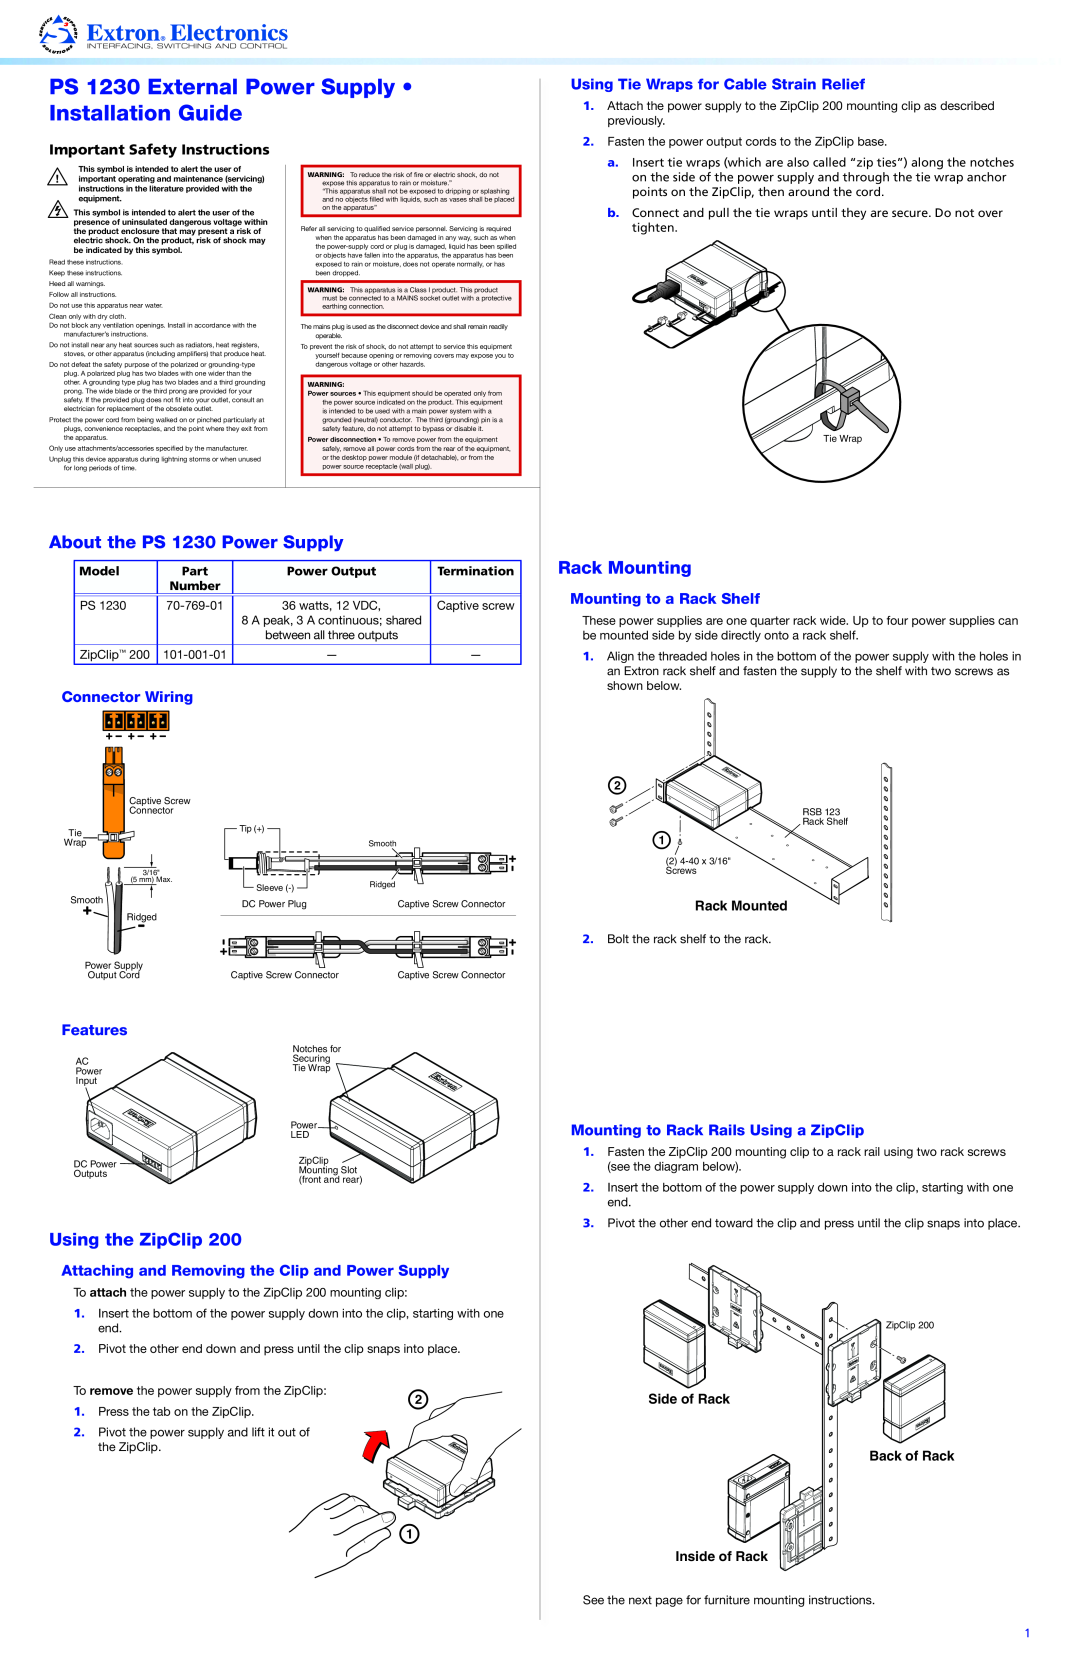 Extron electronic important safety instructions PS 1230 External Power Supply Installation Guide, Rack Mounting, Model 